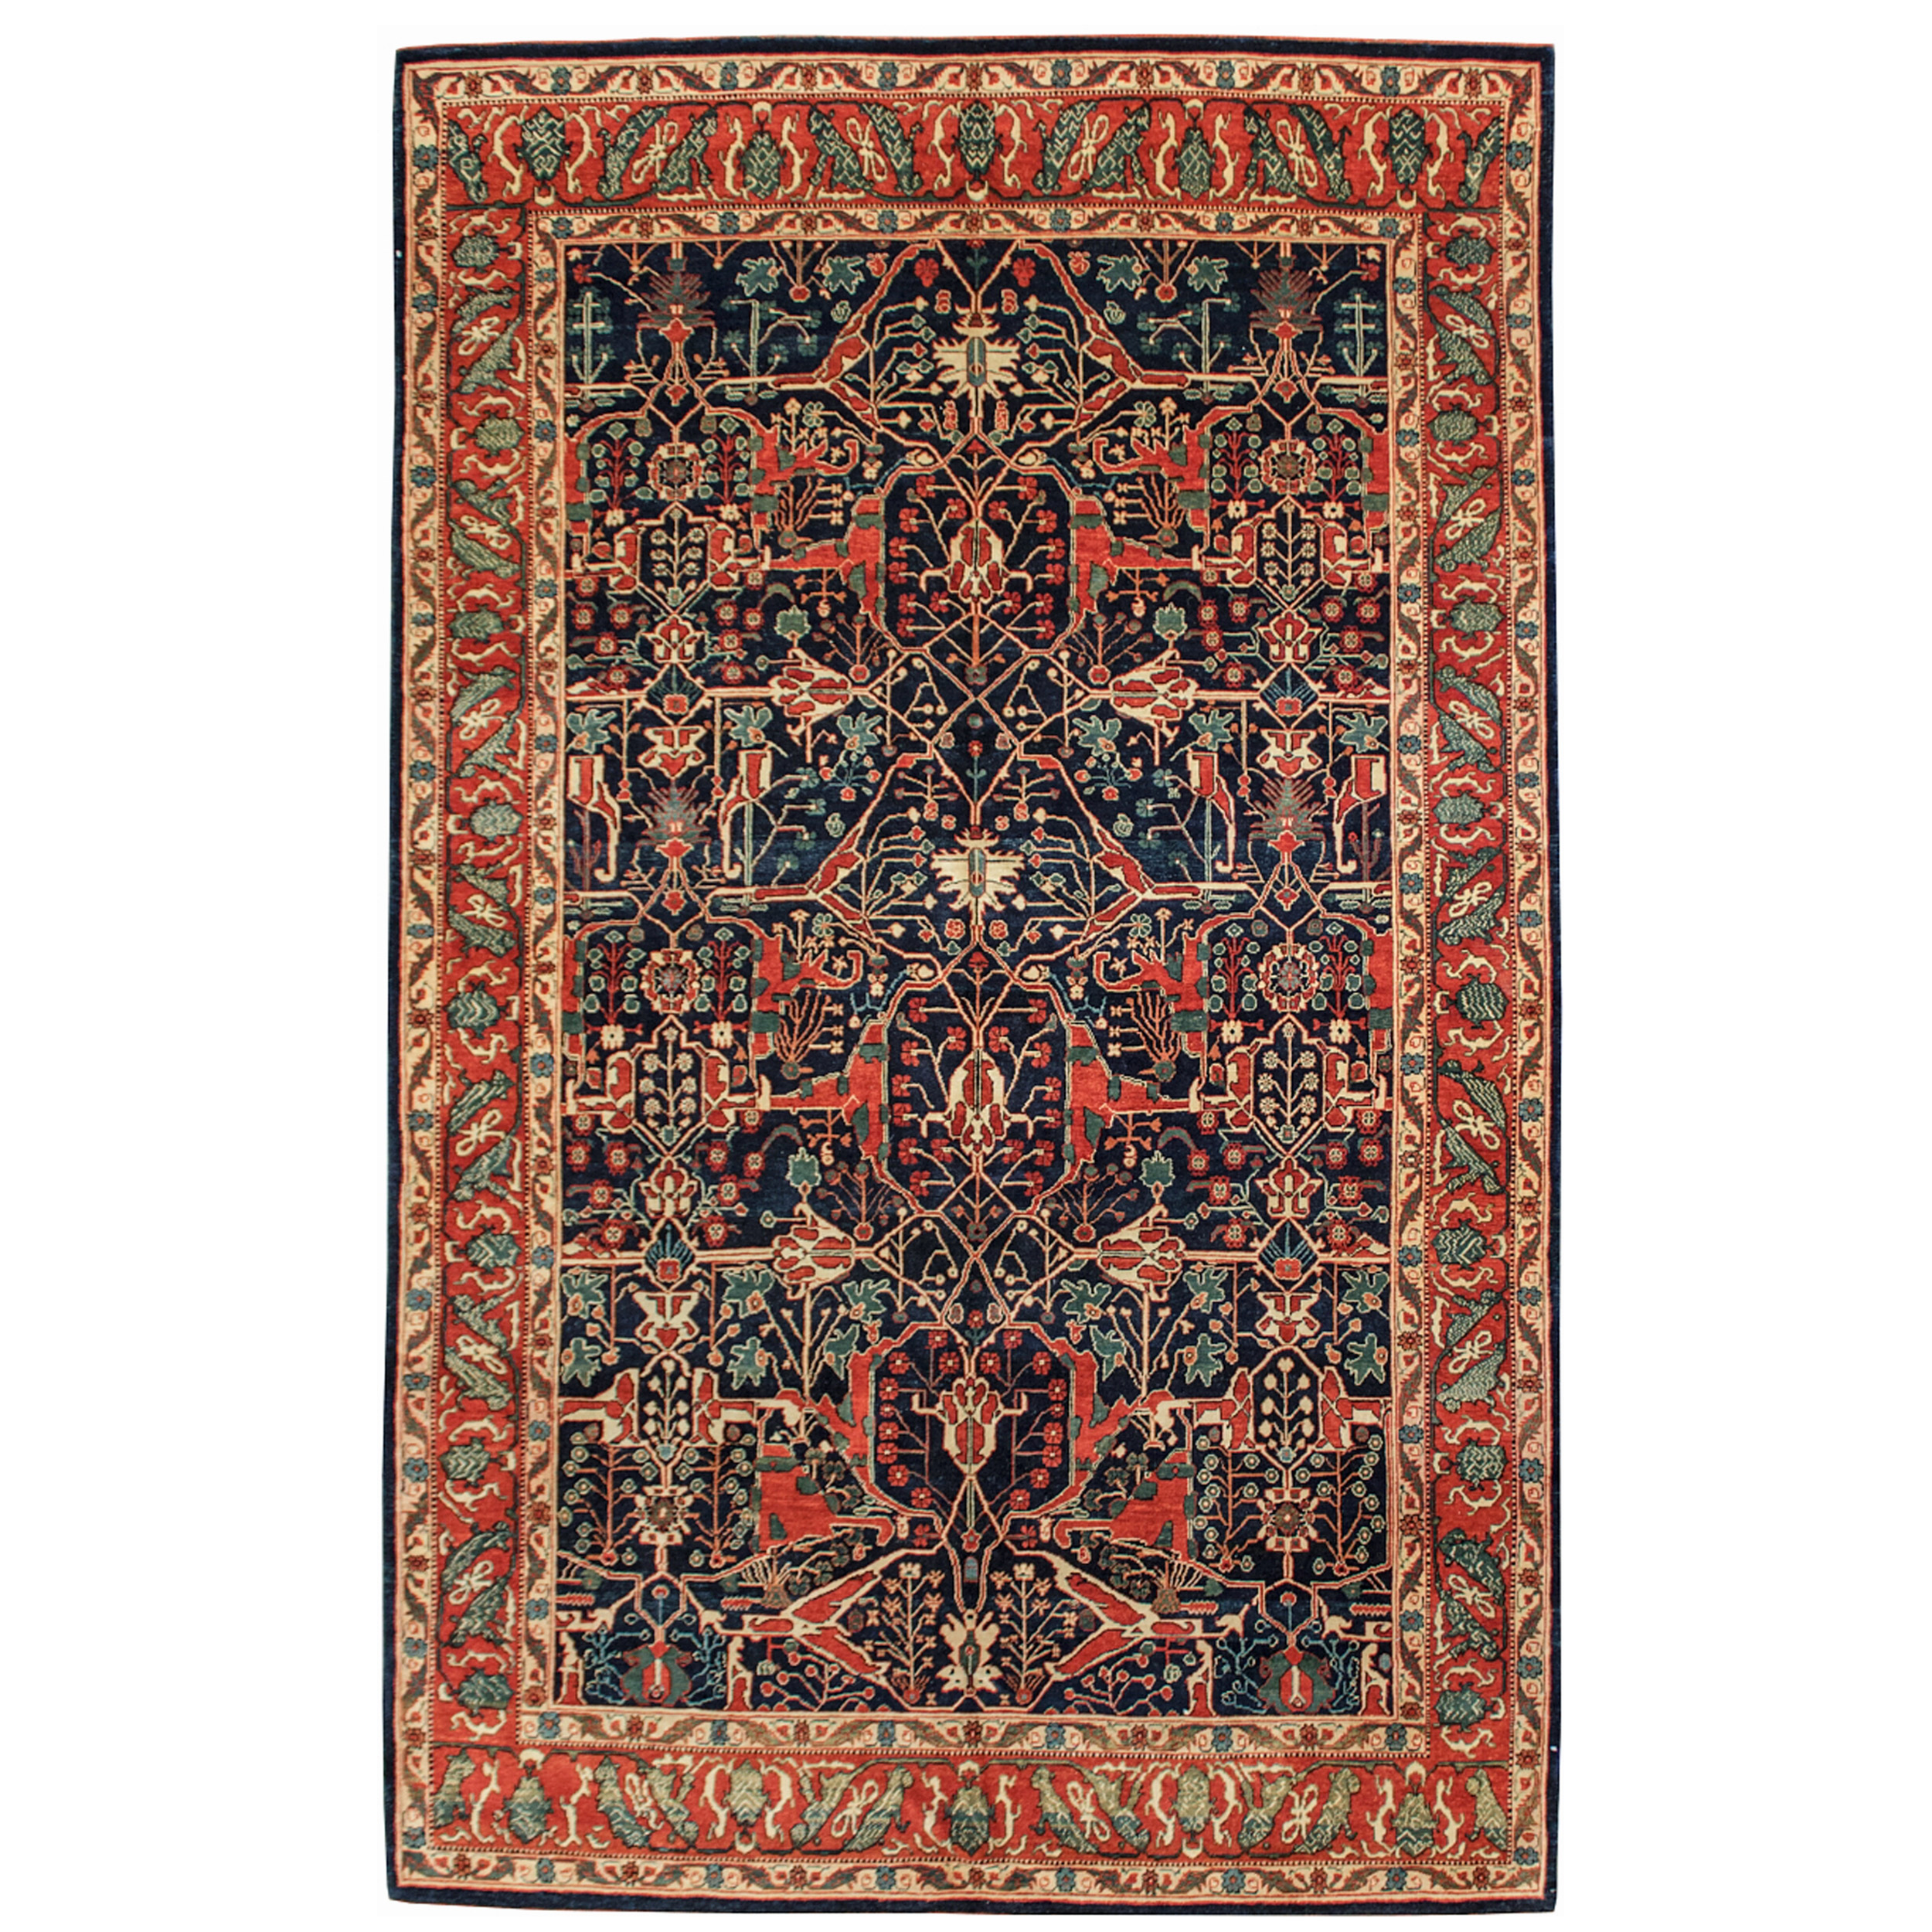 A new Turkish carpet, hand woven utilizing natural dyes and hand spun wool in the style of a 19th century Persian Bidjar carpet with a Split Arabesque design on a navy field